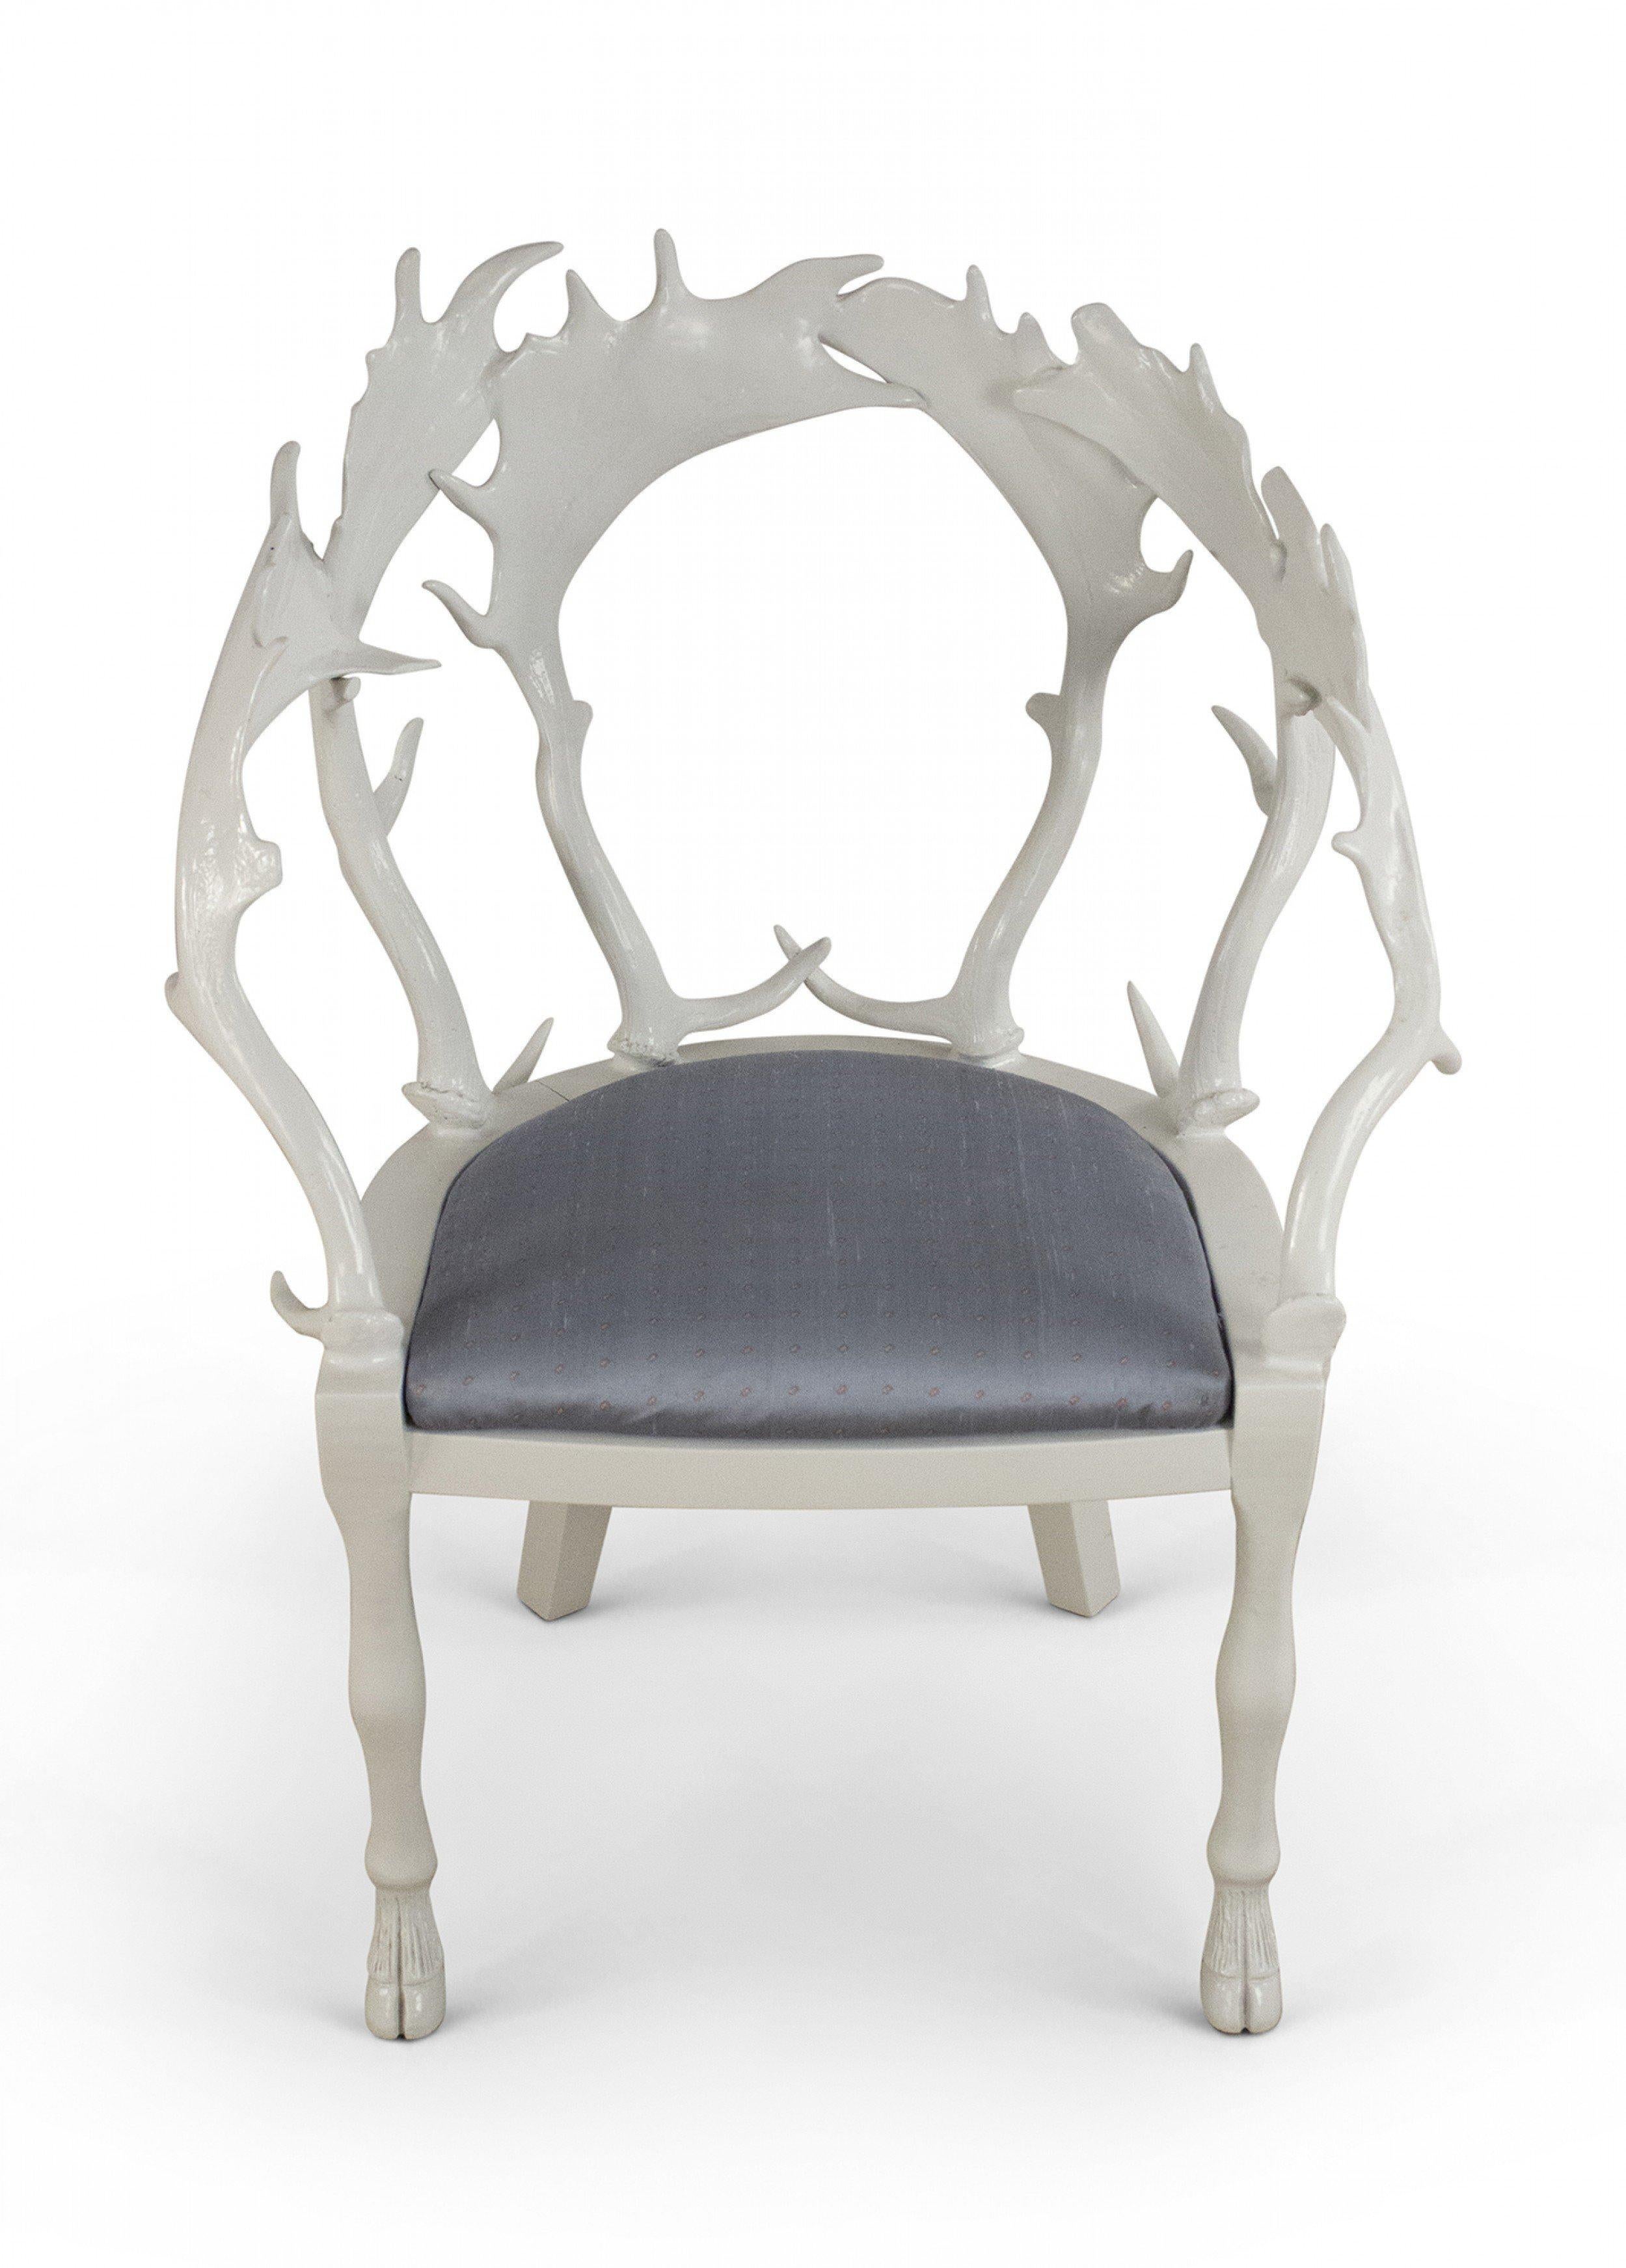 20th Century Set of 4 Redmile Postmodern English White Lacquered Fantasy Horn Chairs For Sale